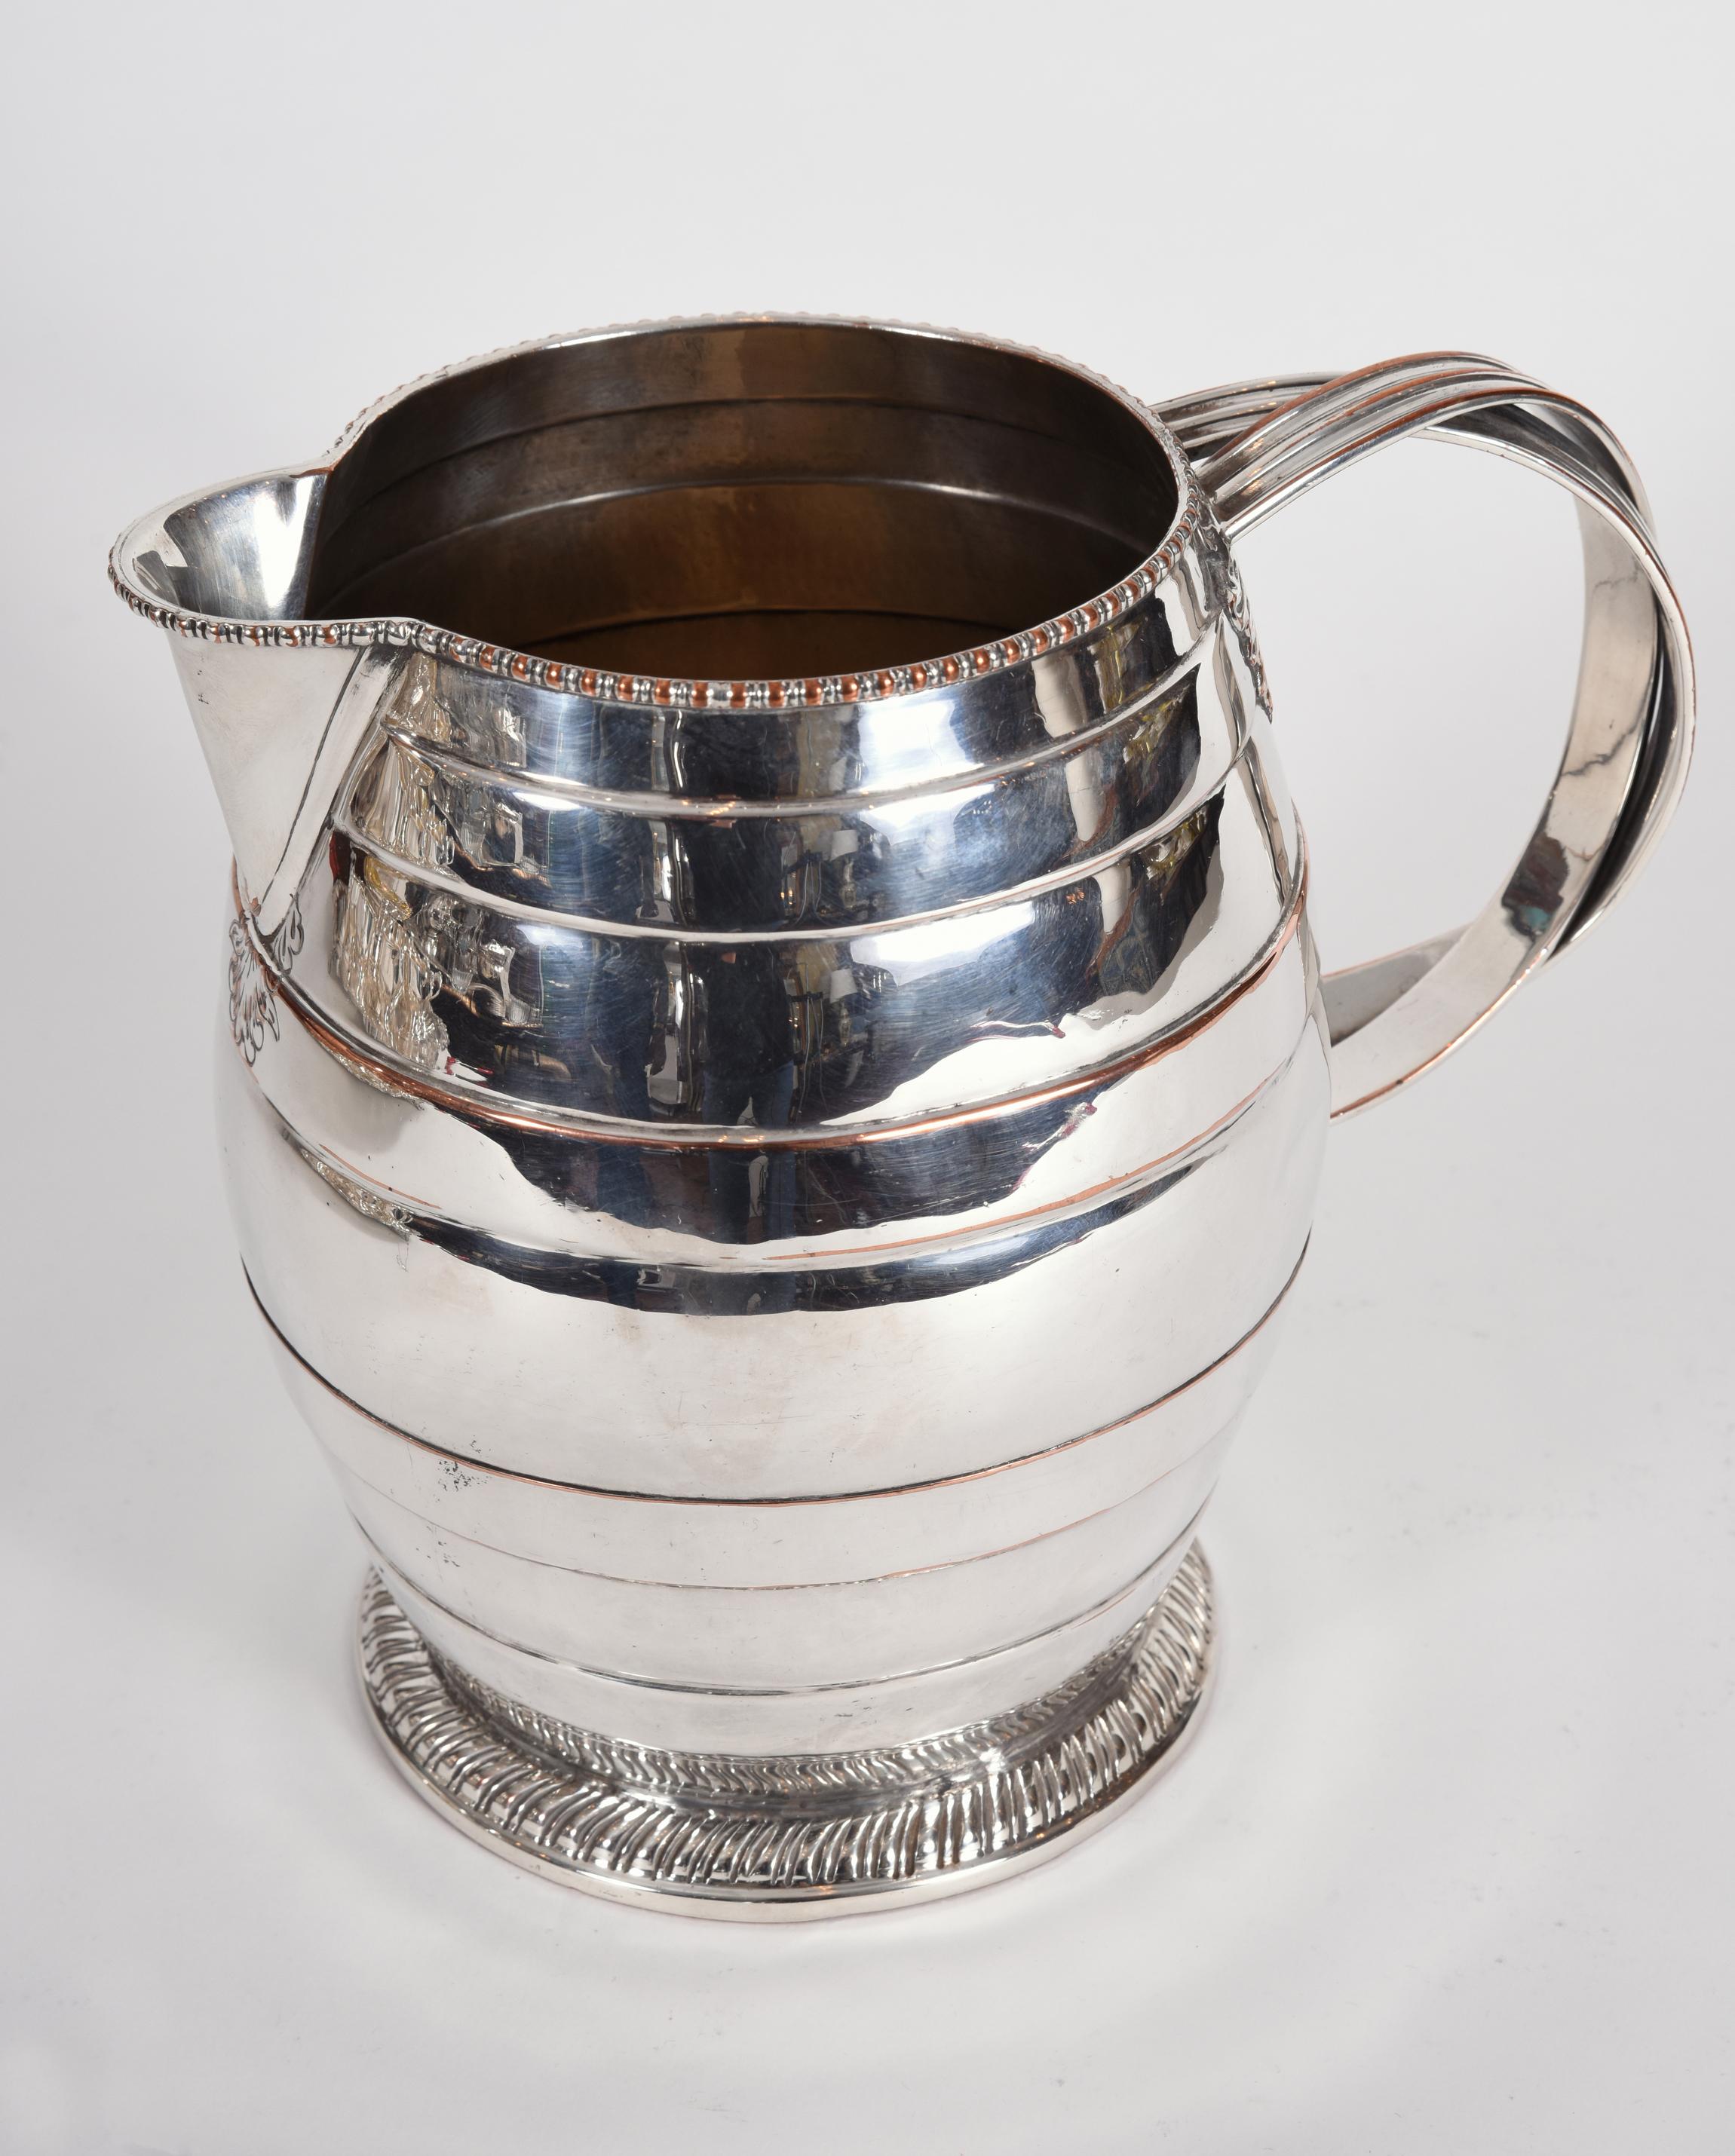 Antique English silver plated / copper tableware water pitcher with exterior design details and side handle. The pitcher is in excellent antique condition with minor wear due to age. The pitcher measure about 9 inches diameter x 7.5 inches high.